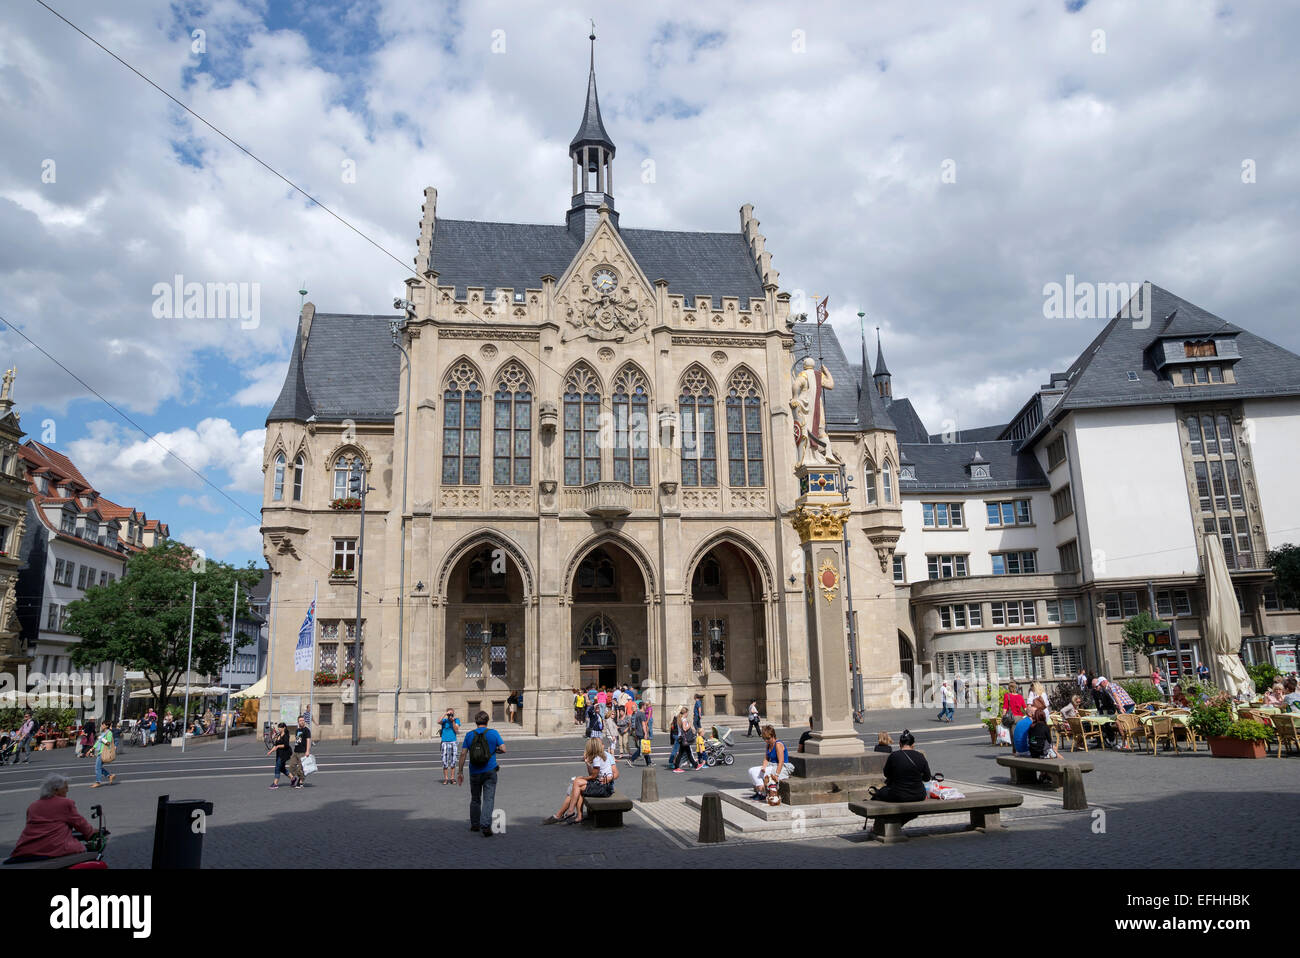 The neo-Gothic town hall on Fischmark, Erfurt, capital city of Thuringia, Germany, Europe. Stock Photo